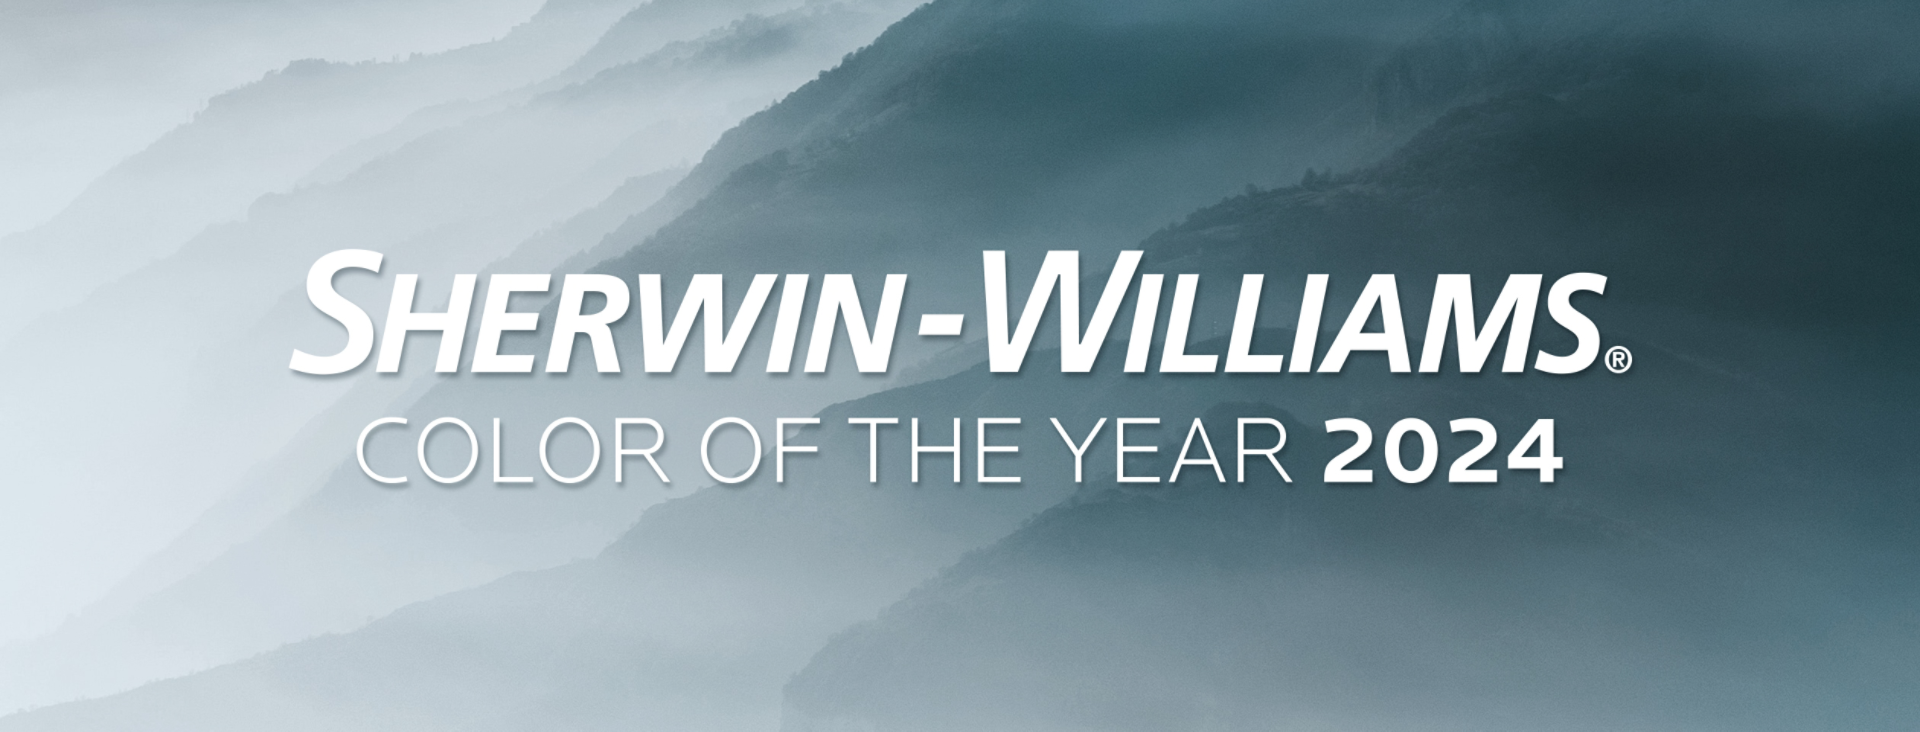 Sherwin-Williams Color of the Year 2024 logo on background image of a misty mountain range.